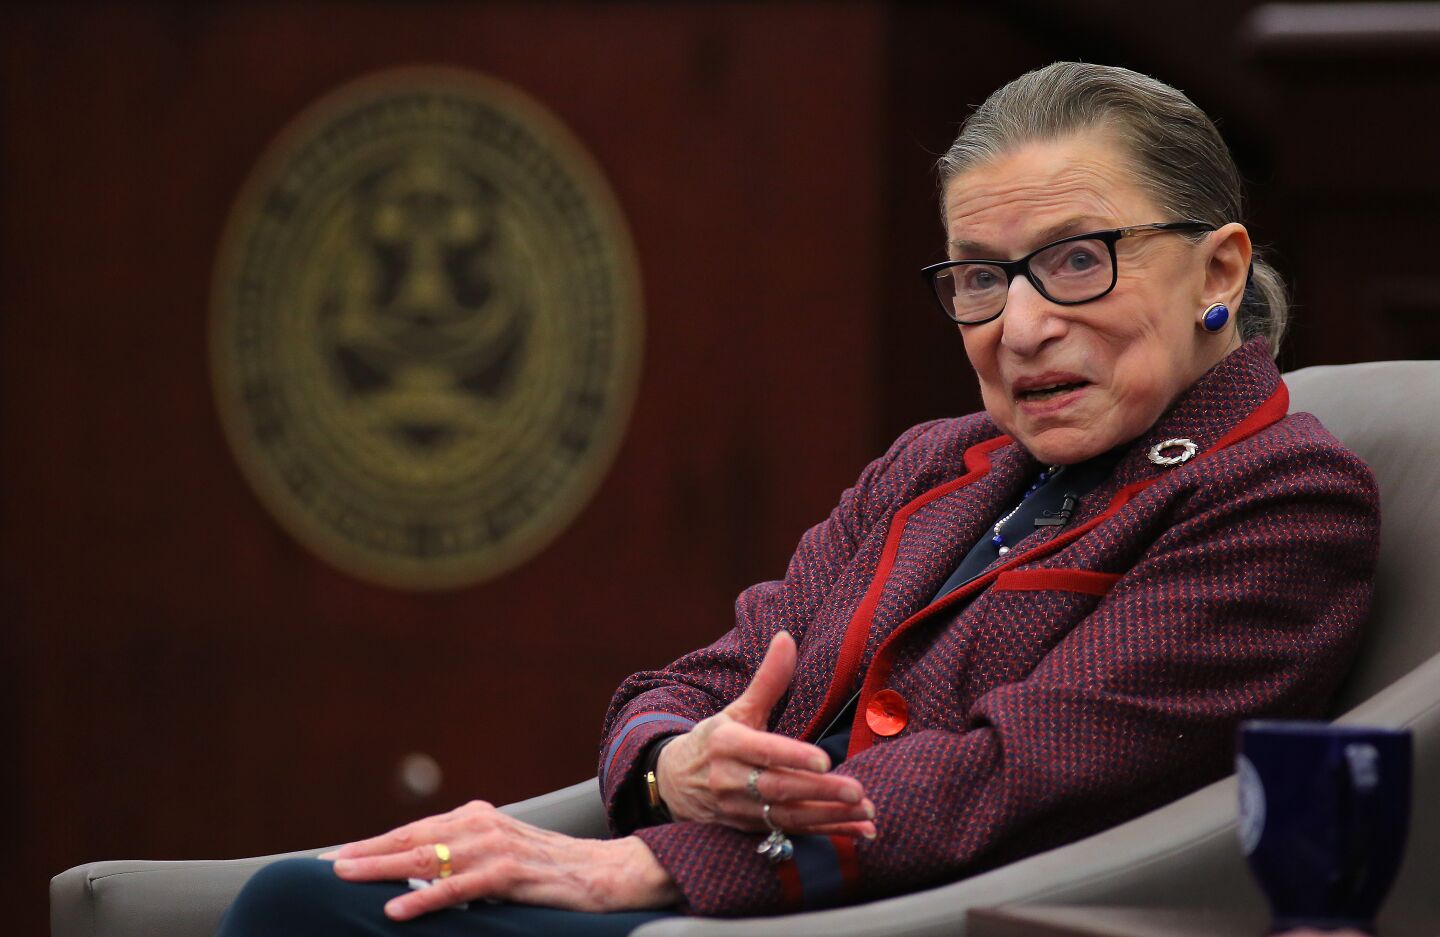 Ruth Bader Ginsburg sits back in a chair while speaking at a law school